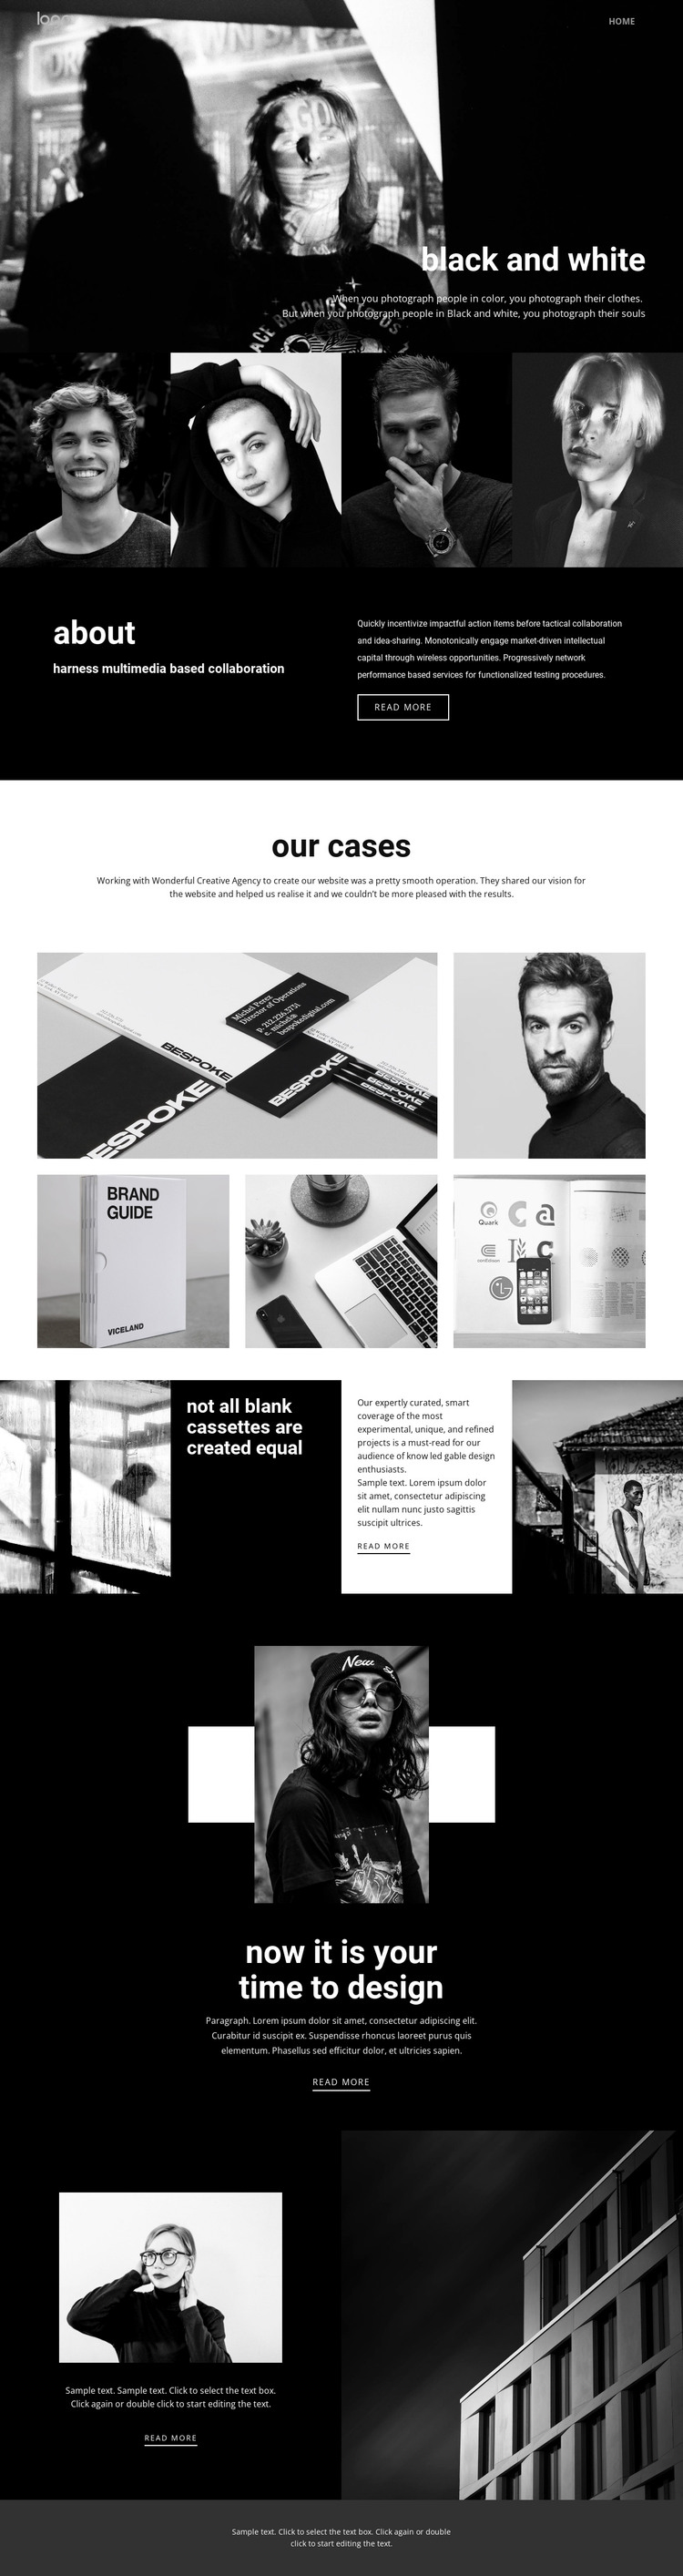 Black and white colors of art Web Design